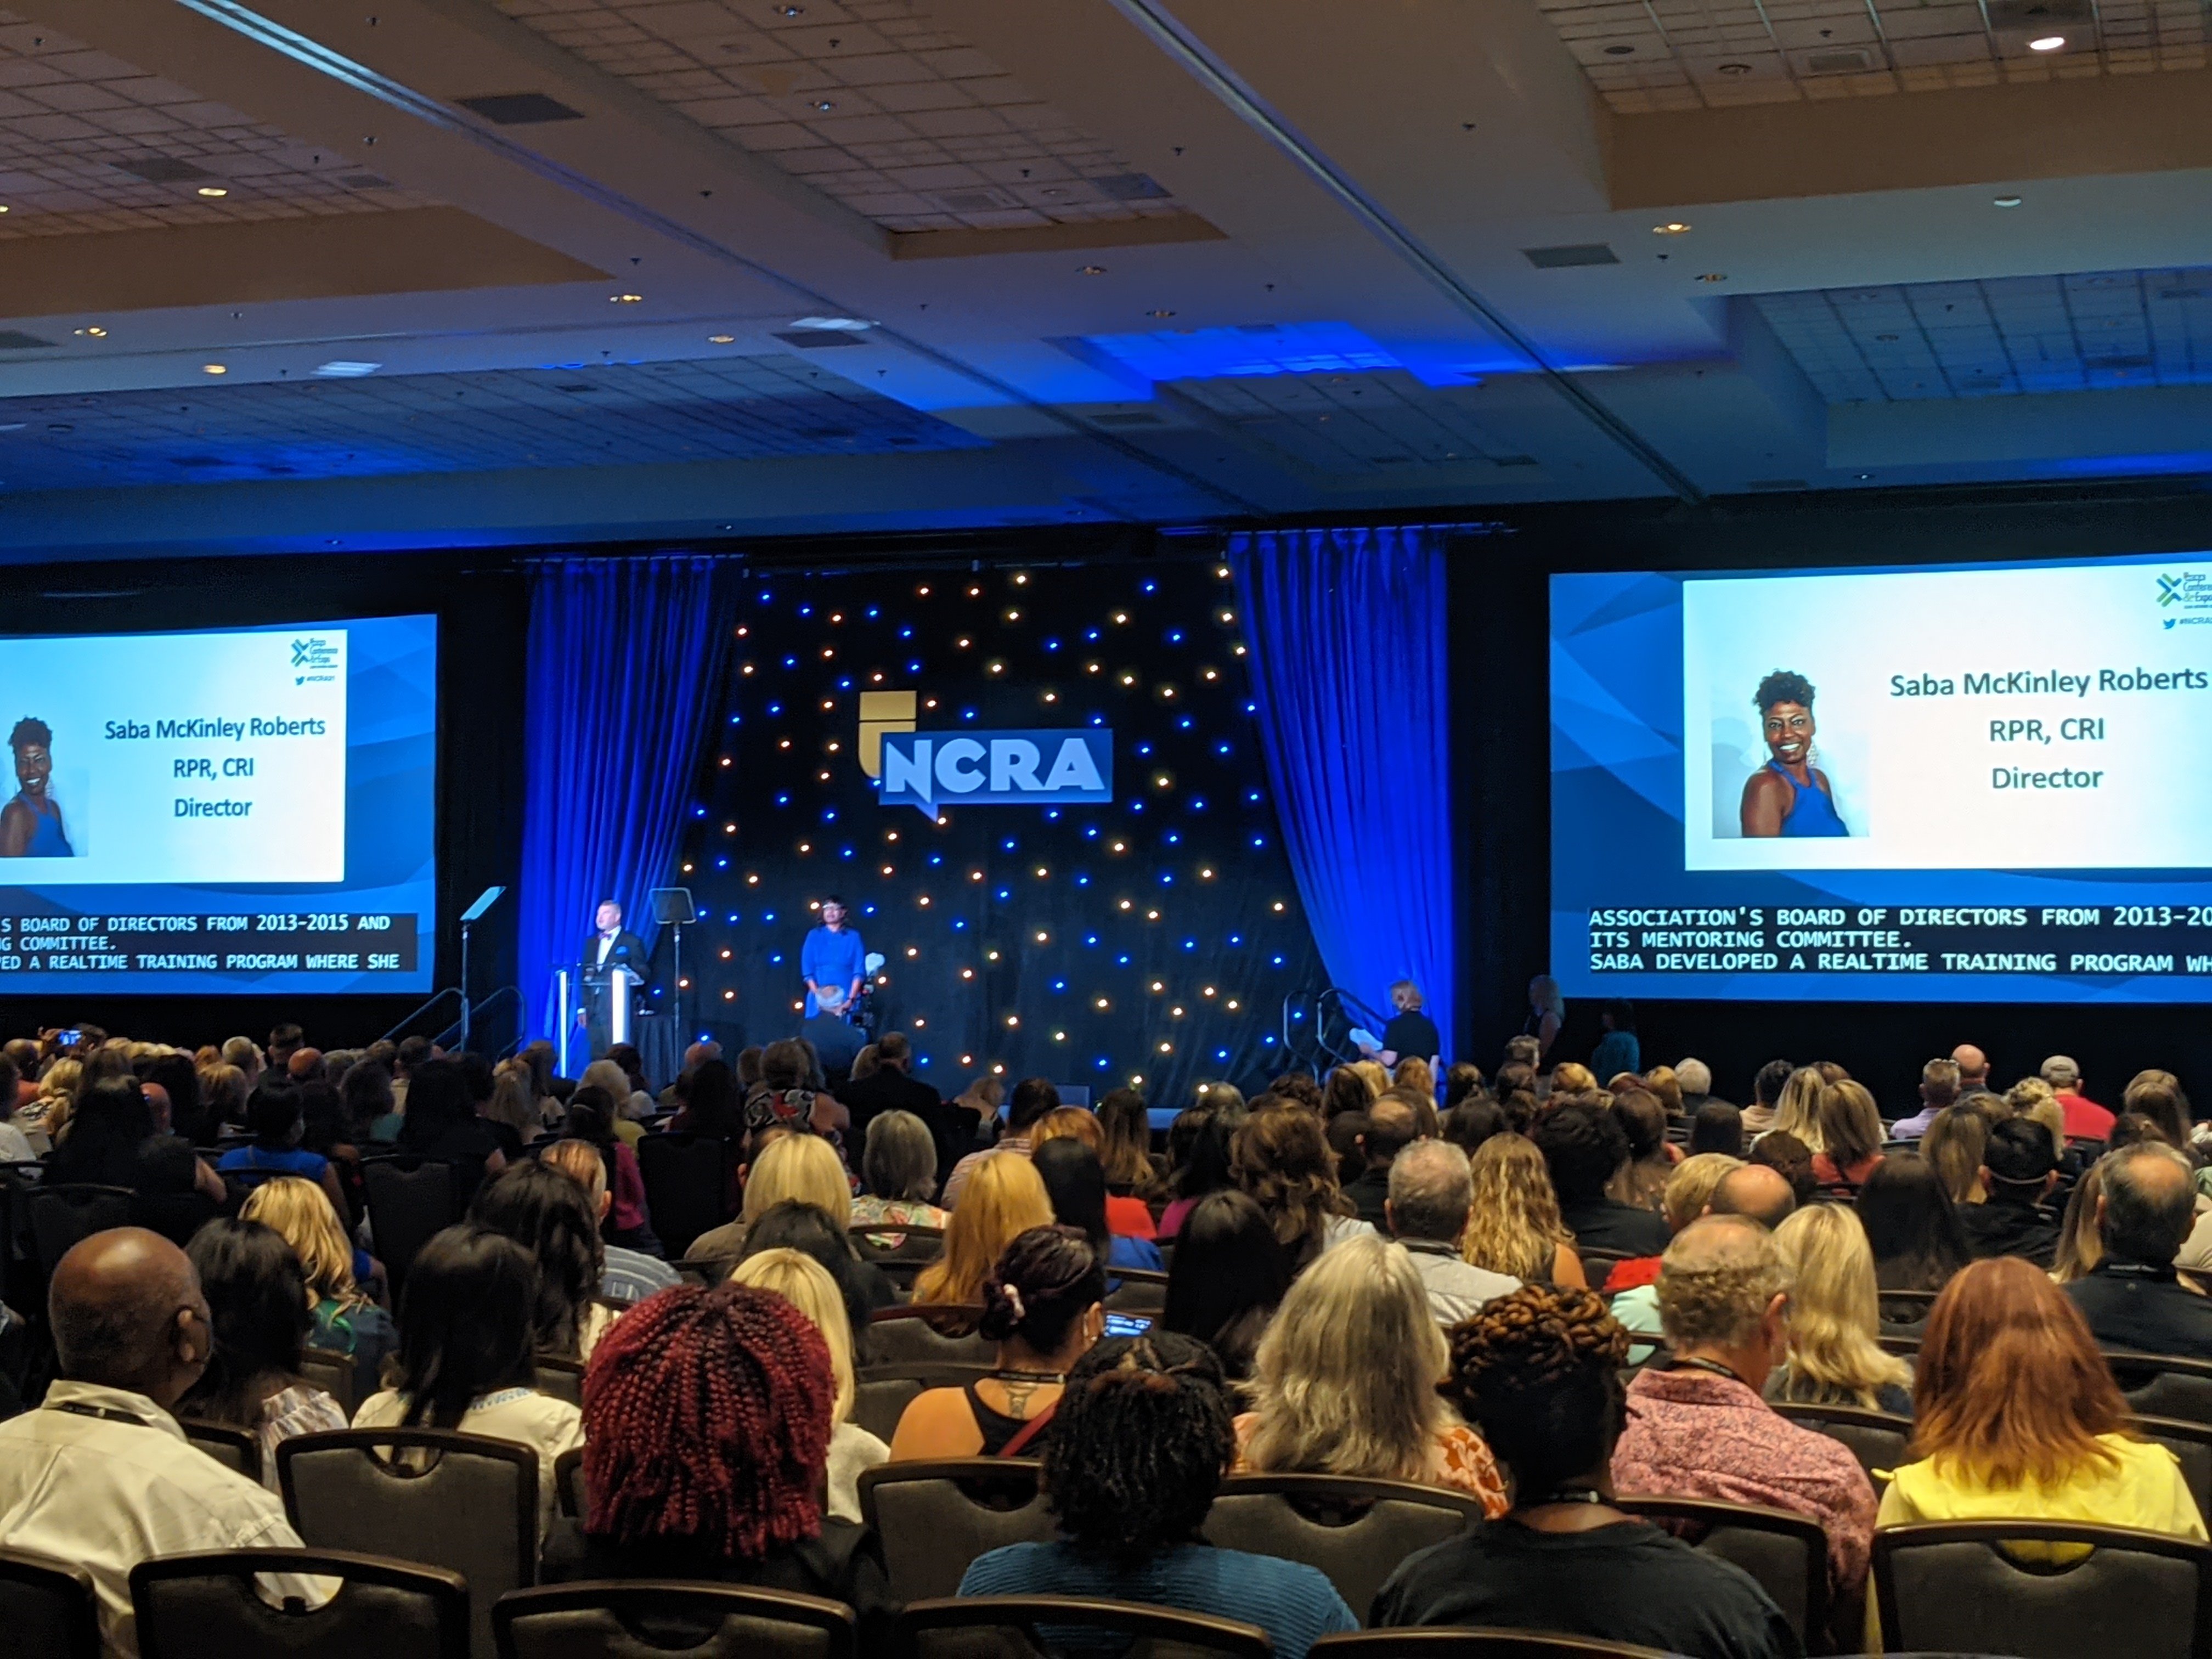 A picture of a packed auditorium. The audience is watching Saba McKinley Roberts leave the stage after being appointed to the NCRA board of directors.